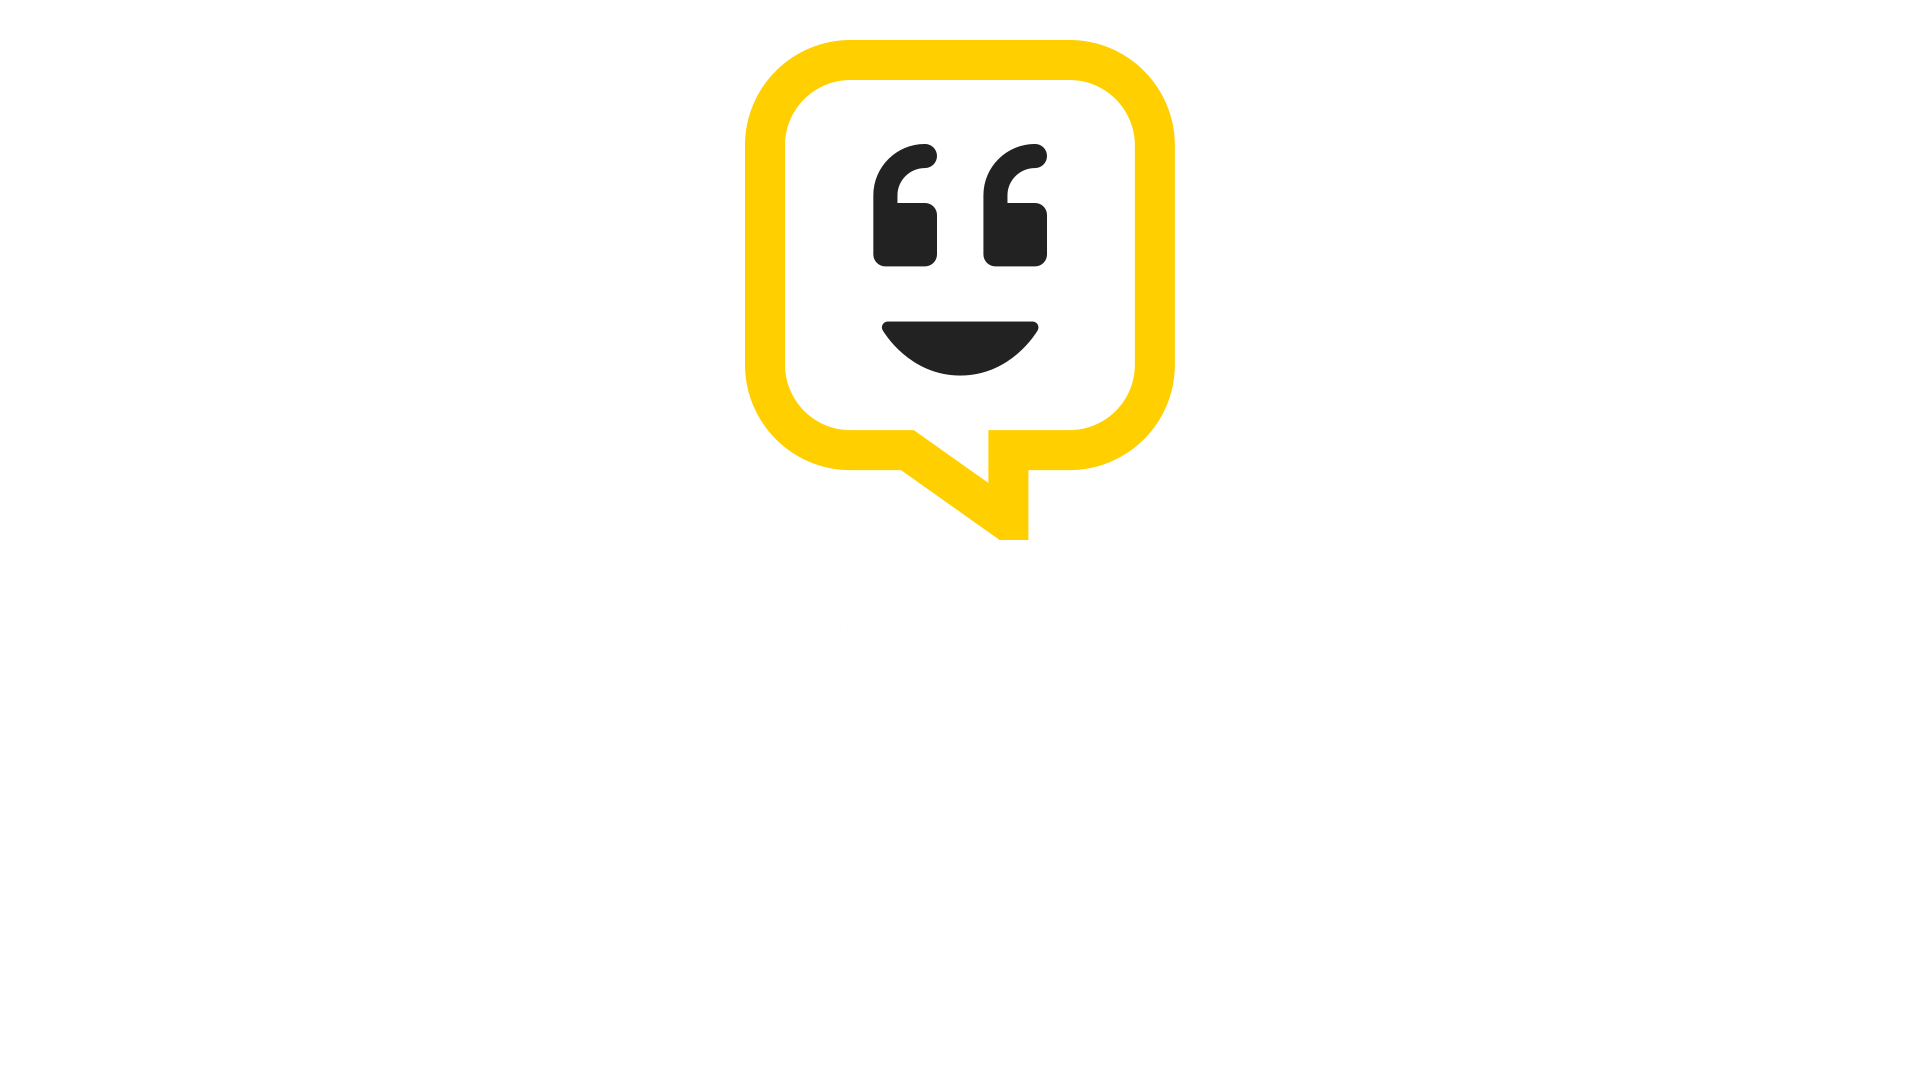 An image of our Parents Helpline webchat icon with the text click on the webchat icon in the bottom corner of your screen to access the parents webchat.